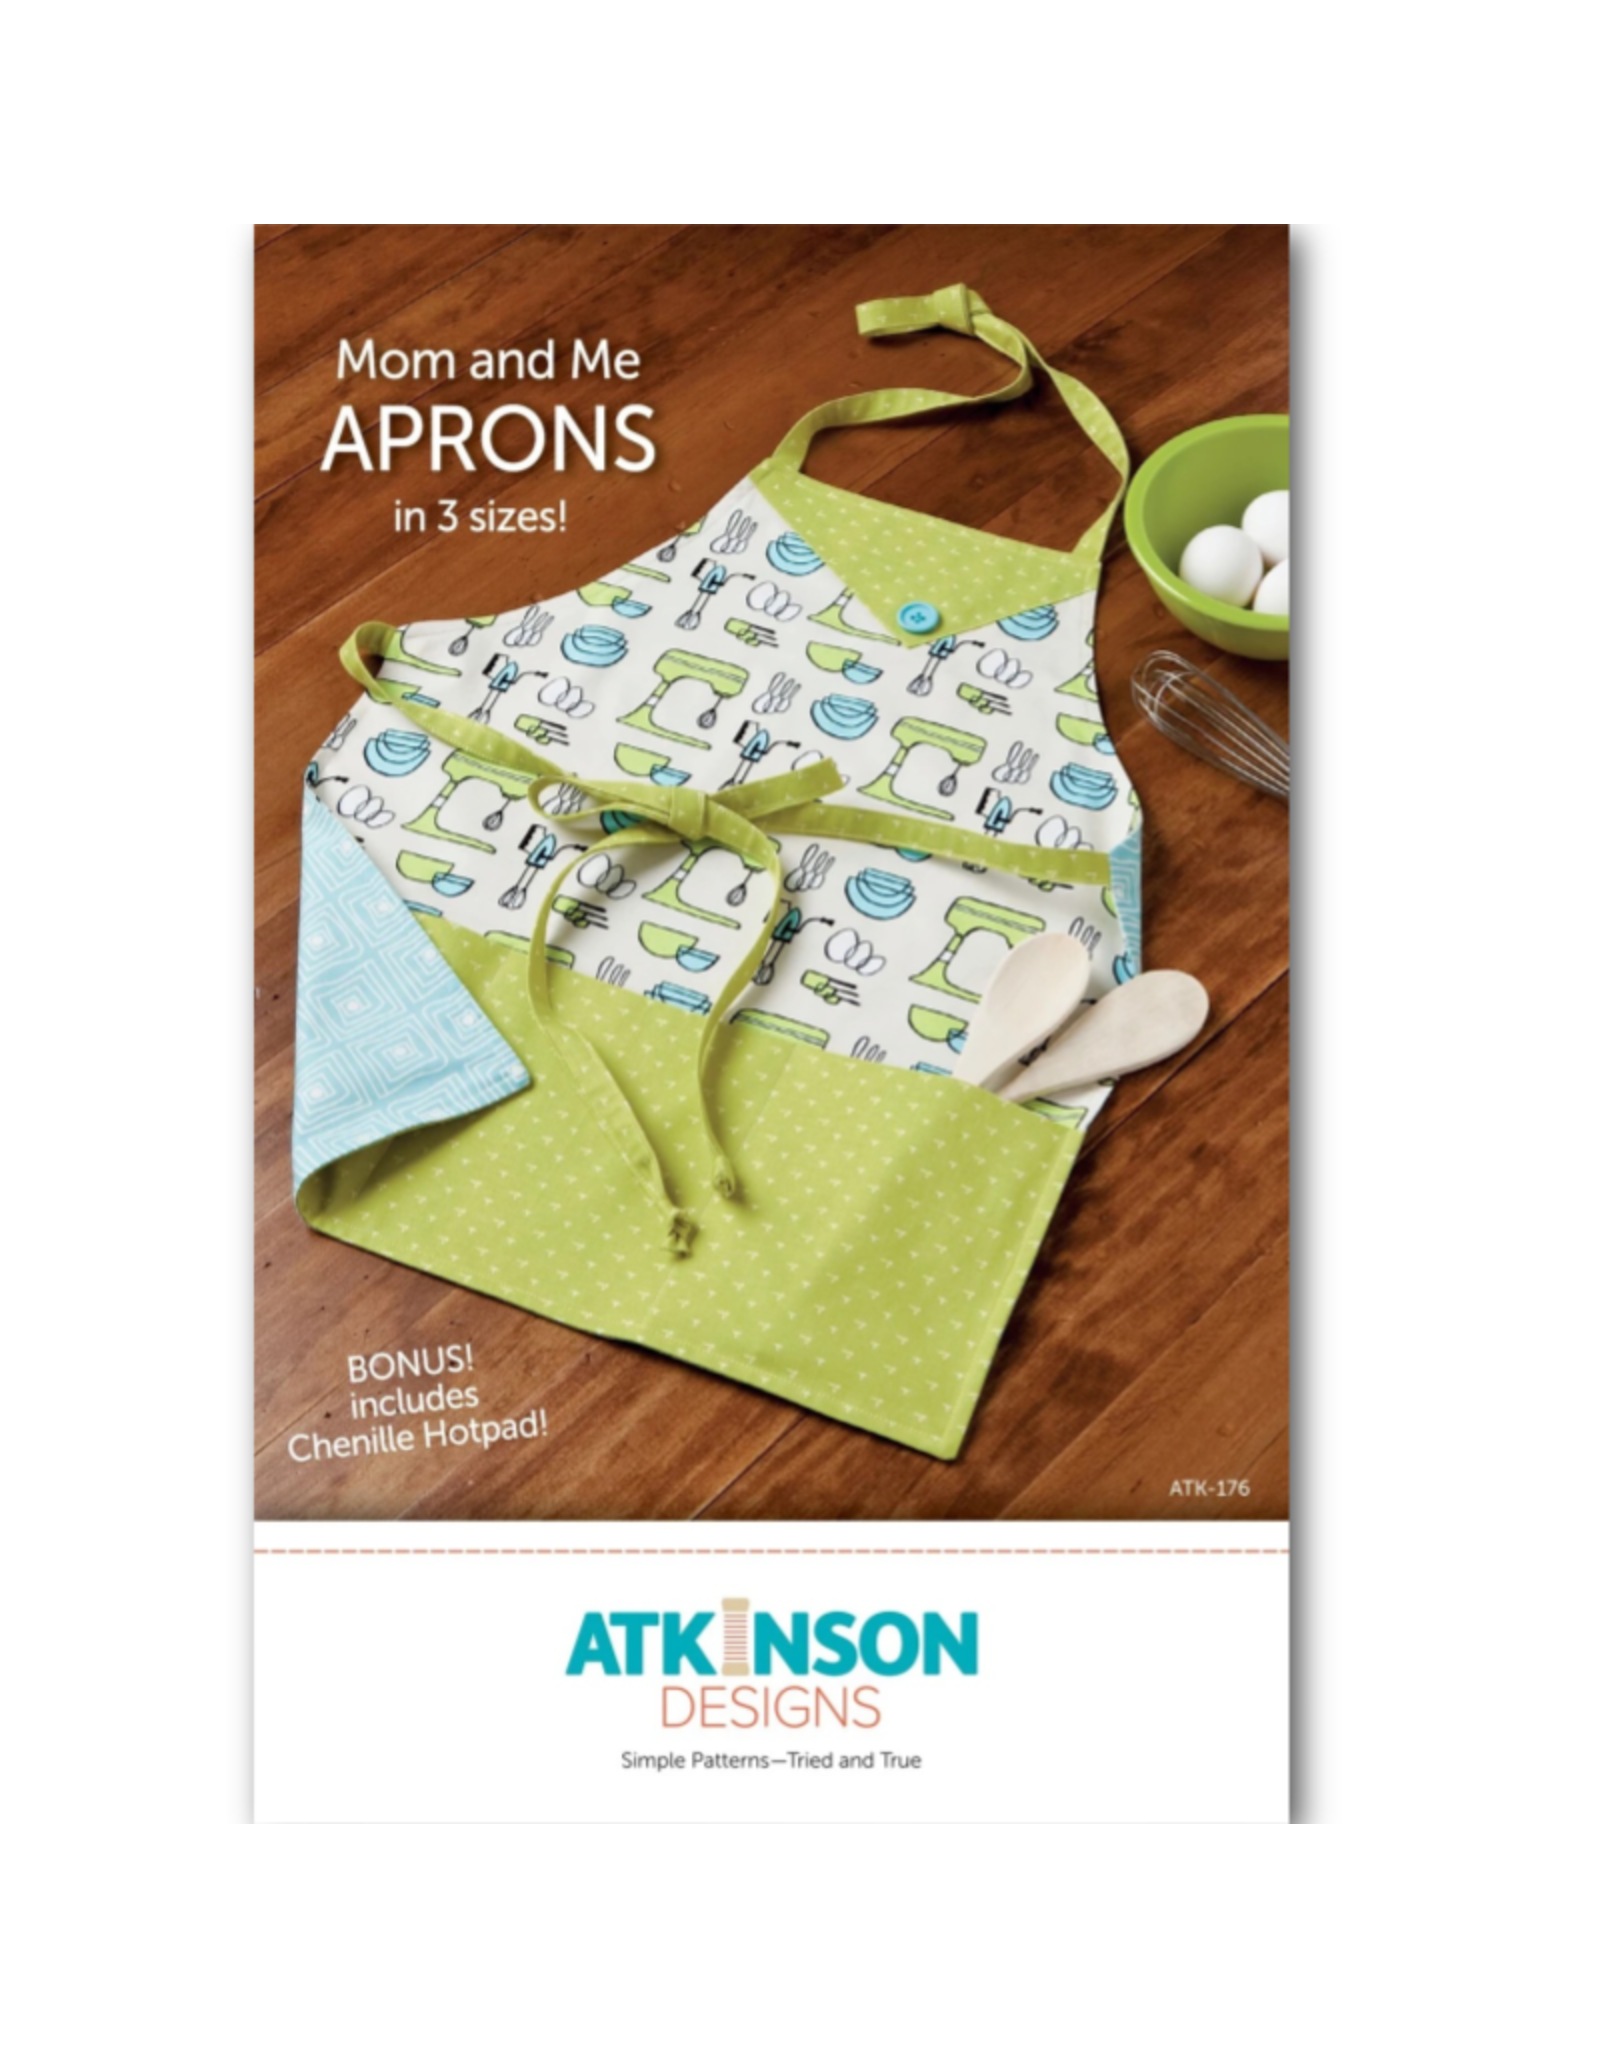 Picking Daisies Mom and Me Apron Pattern - In 3 Sizes!